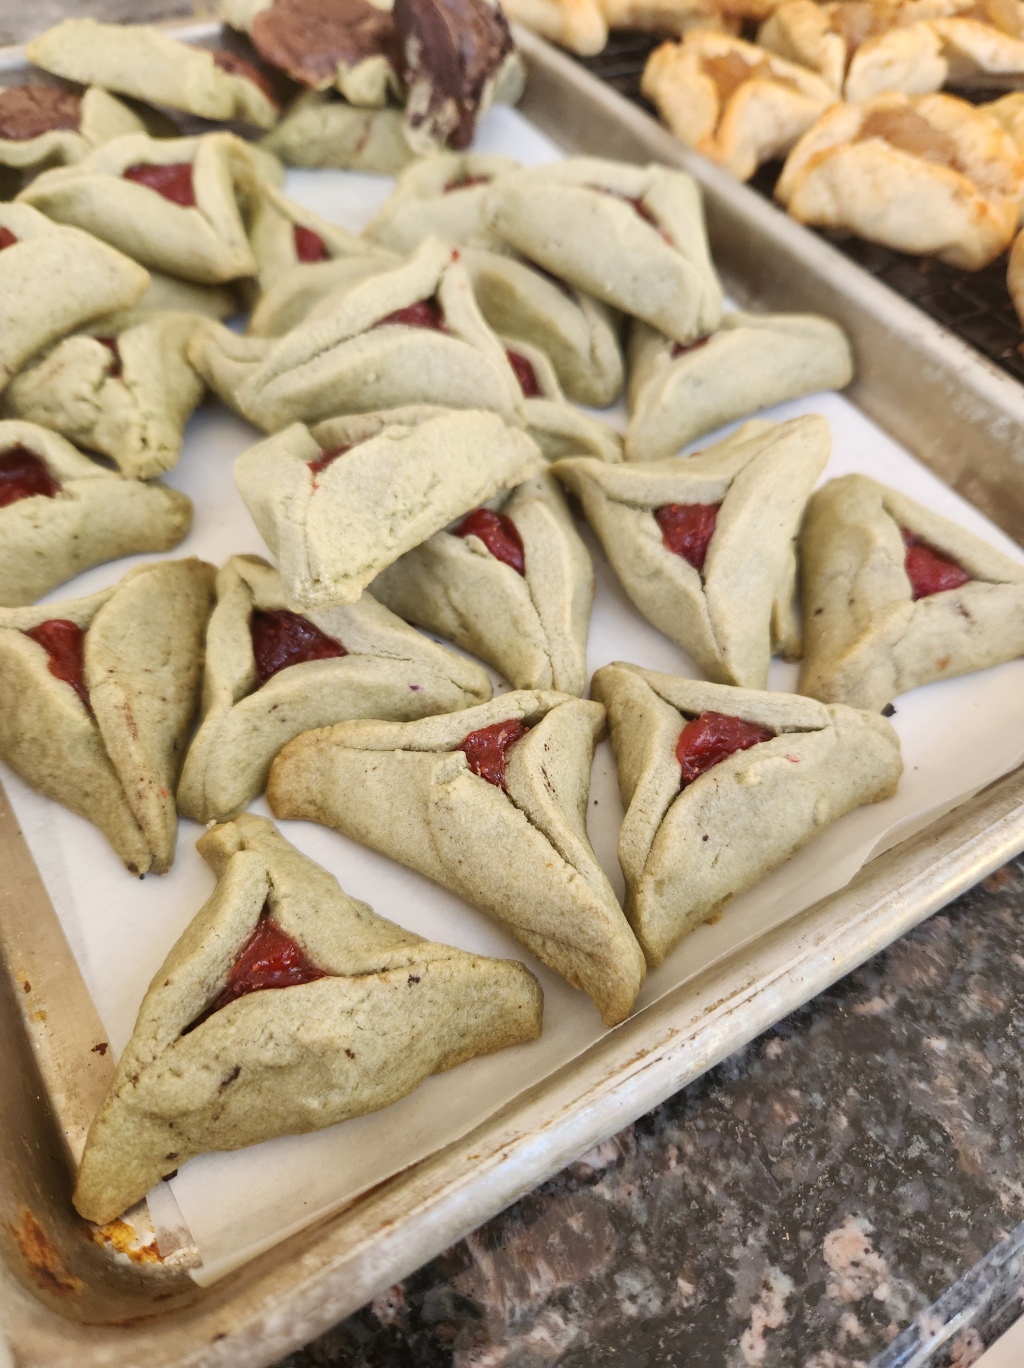 Matcha Hamantaschen with Strawberry filling.